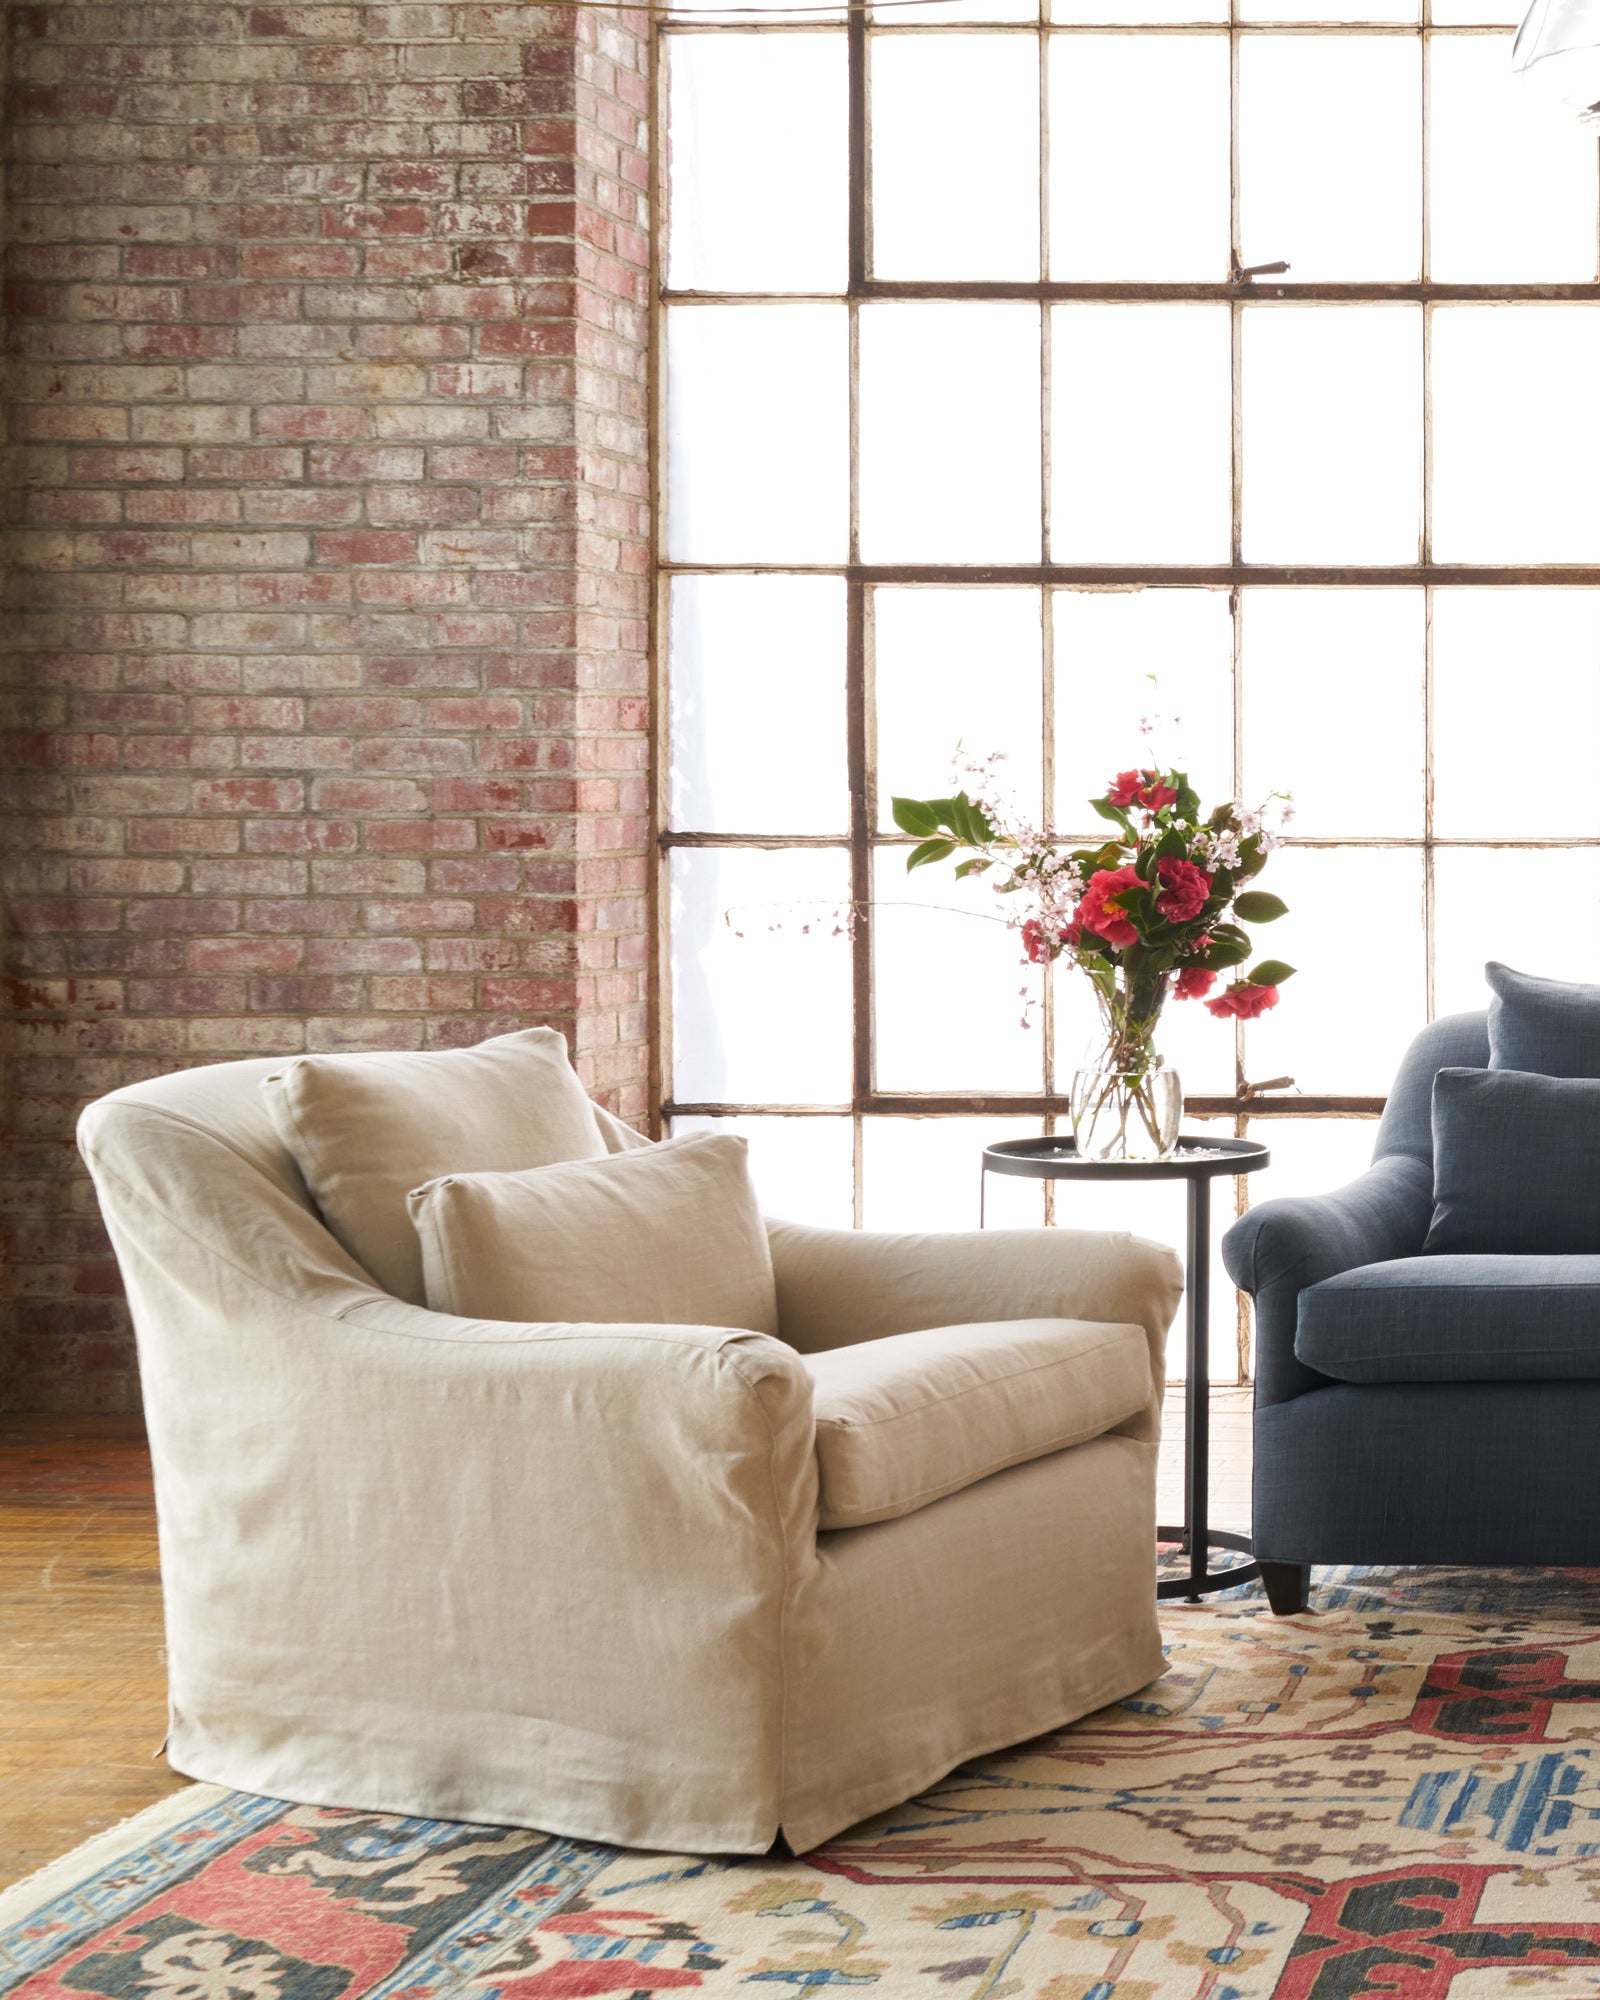  Chair in front of window and brick wall. Blue sofa on the right side and round side table with flowers. Photographed in Noah Bone. 